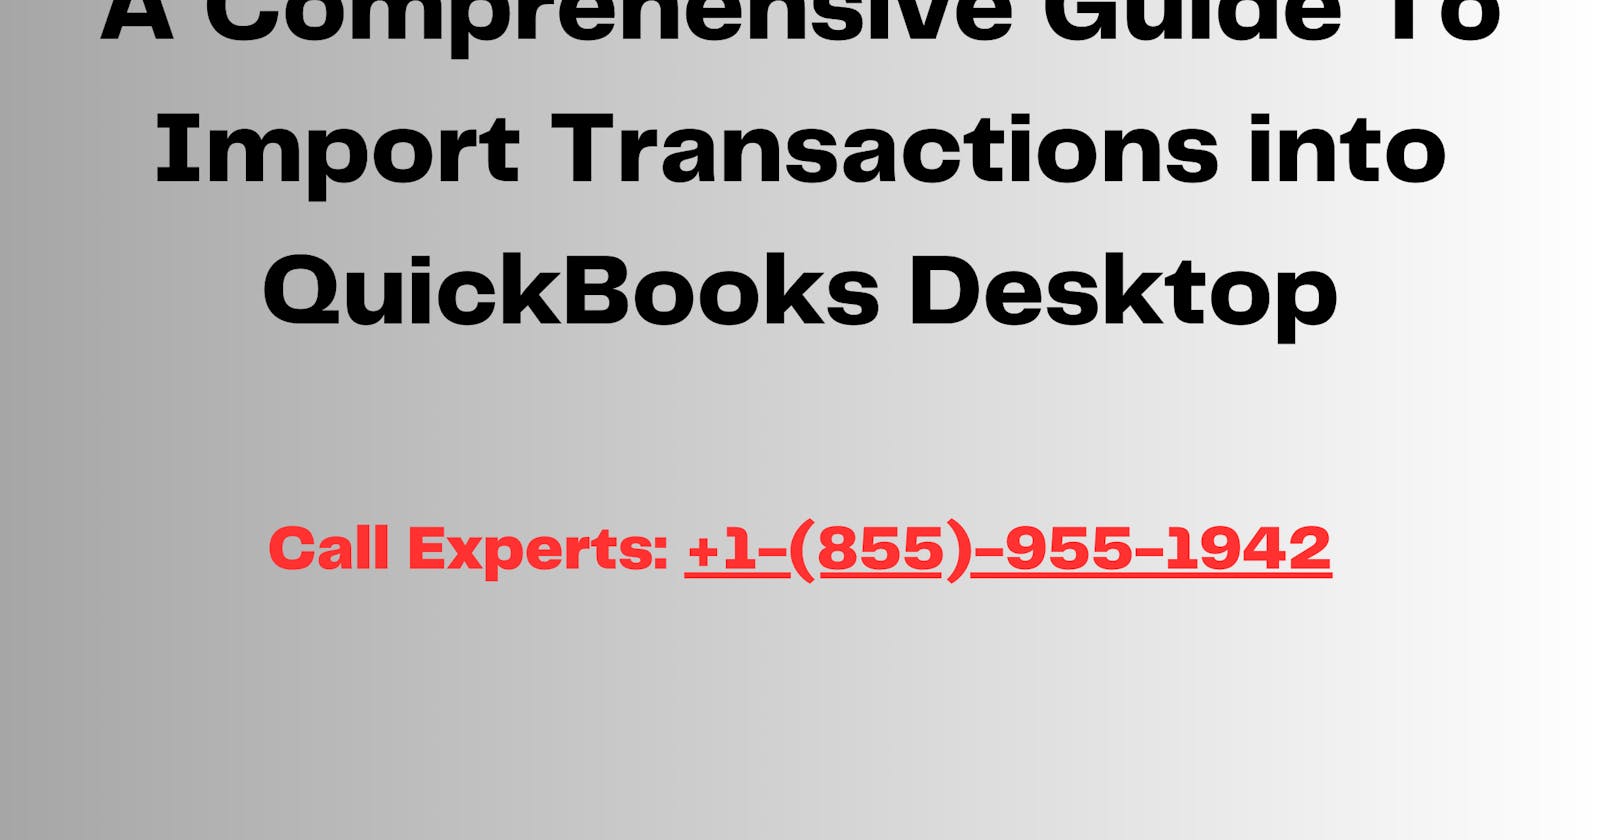 A Comprehensive Guide to Import Transactions Into QuickBooks Desktop